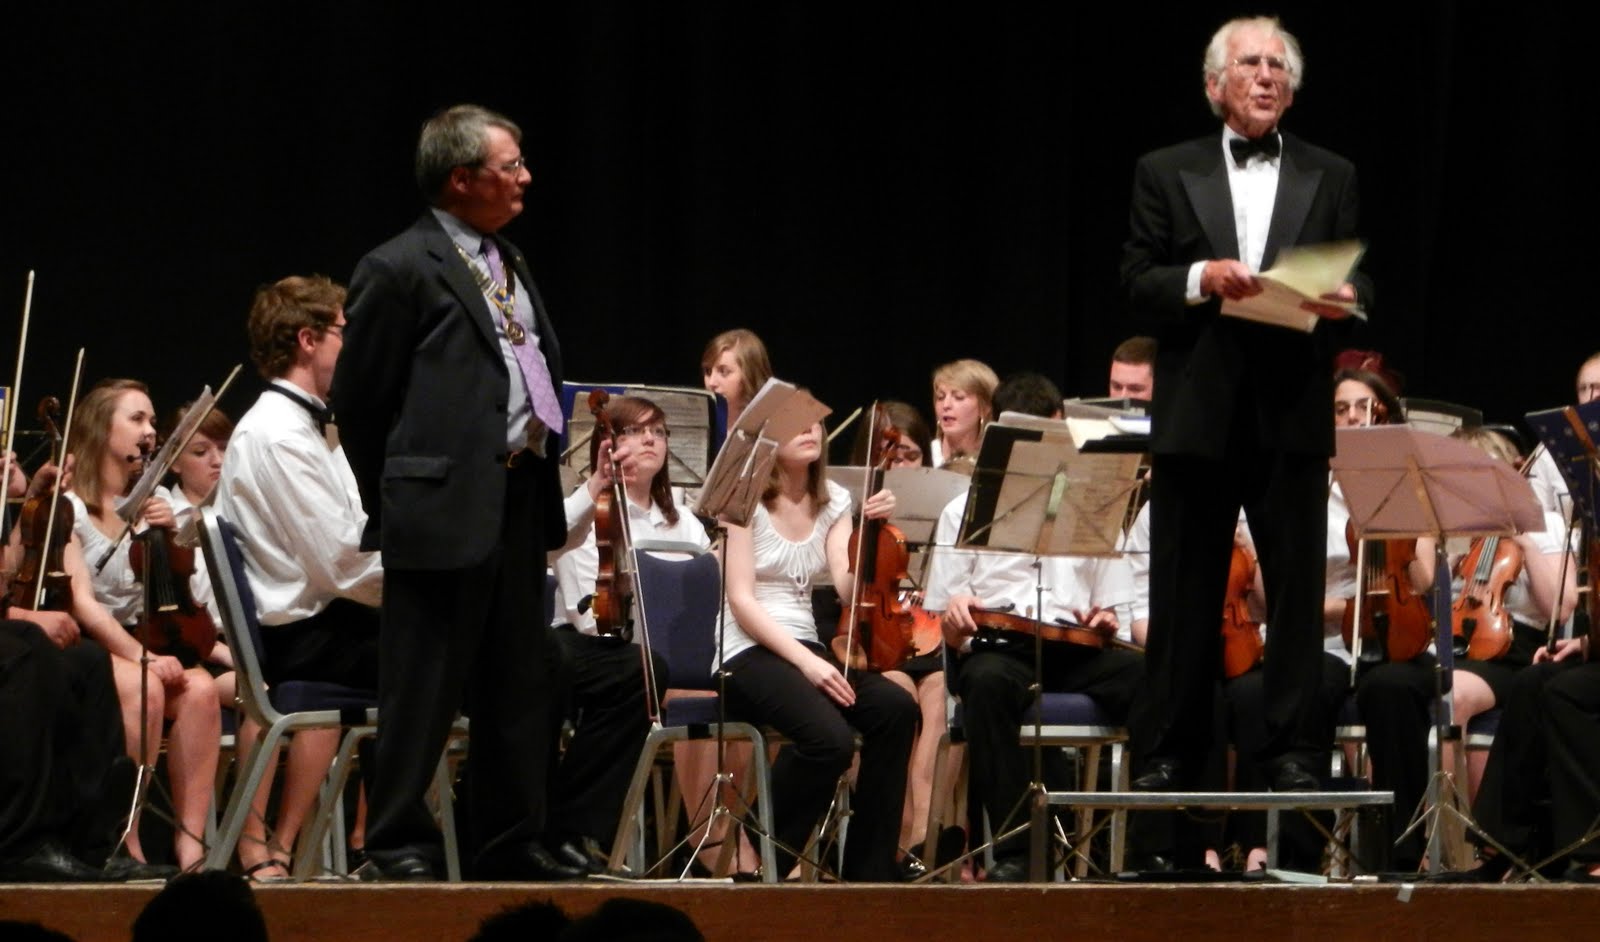 Rotary Club of Tettenhall: Wolverhampton Youth Orchestras